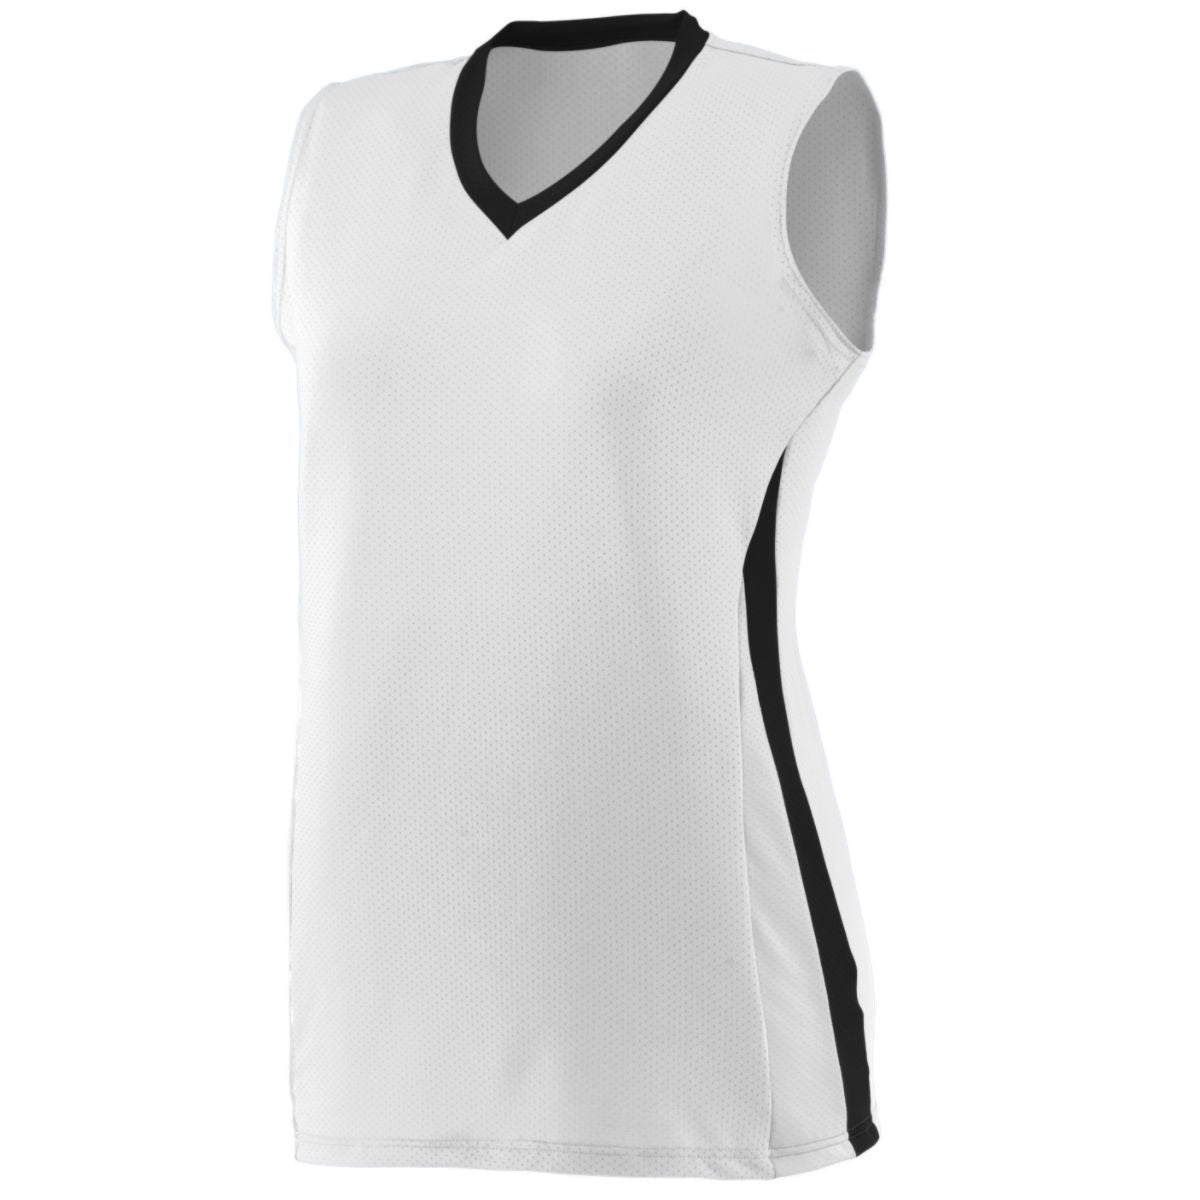 Augusta Sportswear Ladies Tornado Jersey in White/Black/White  -Part of the Ladies, Ladies-Jersey, Augusta-Products, Volleyball, Shirts product lines at KanaleyCreations.com